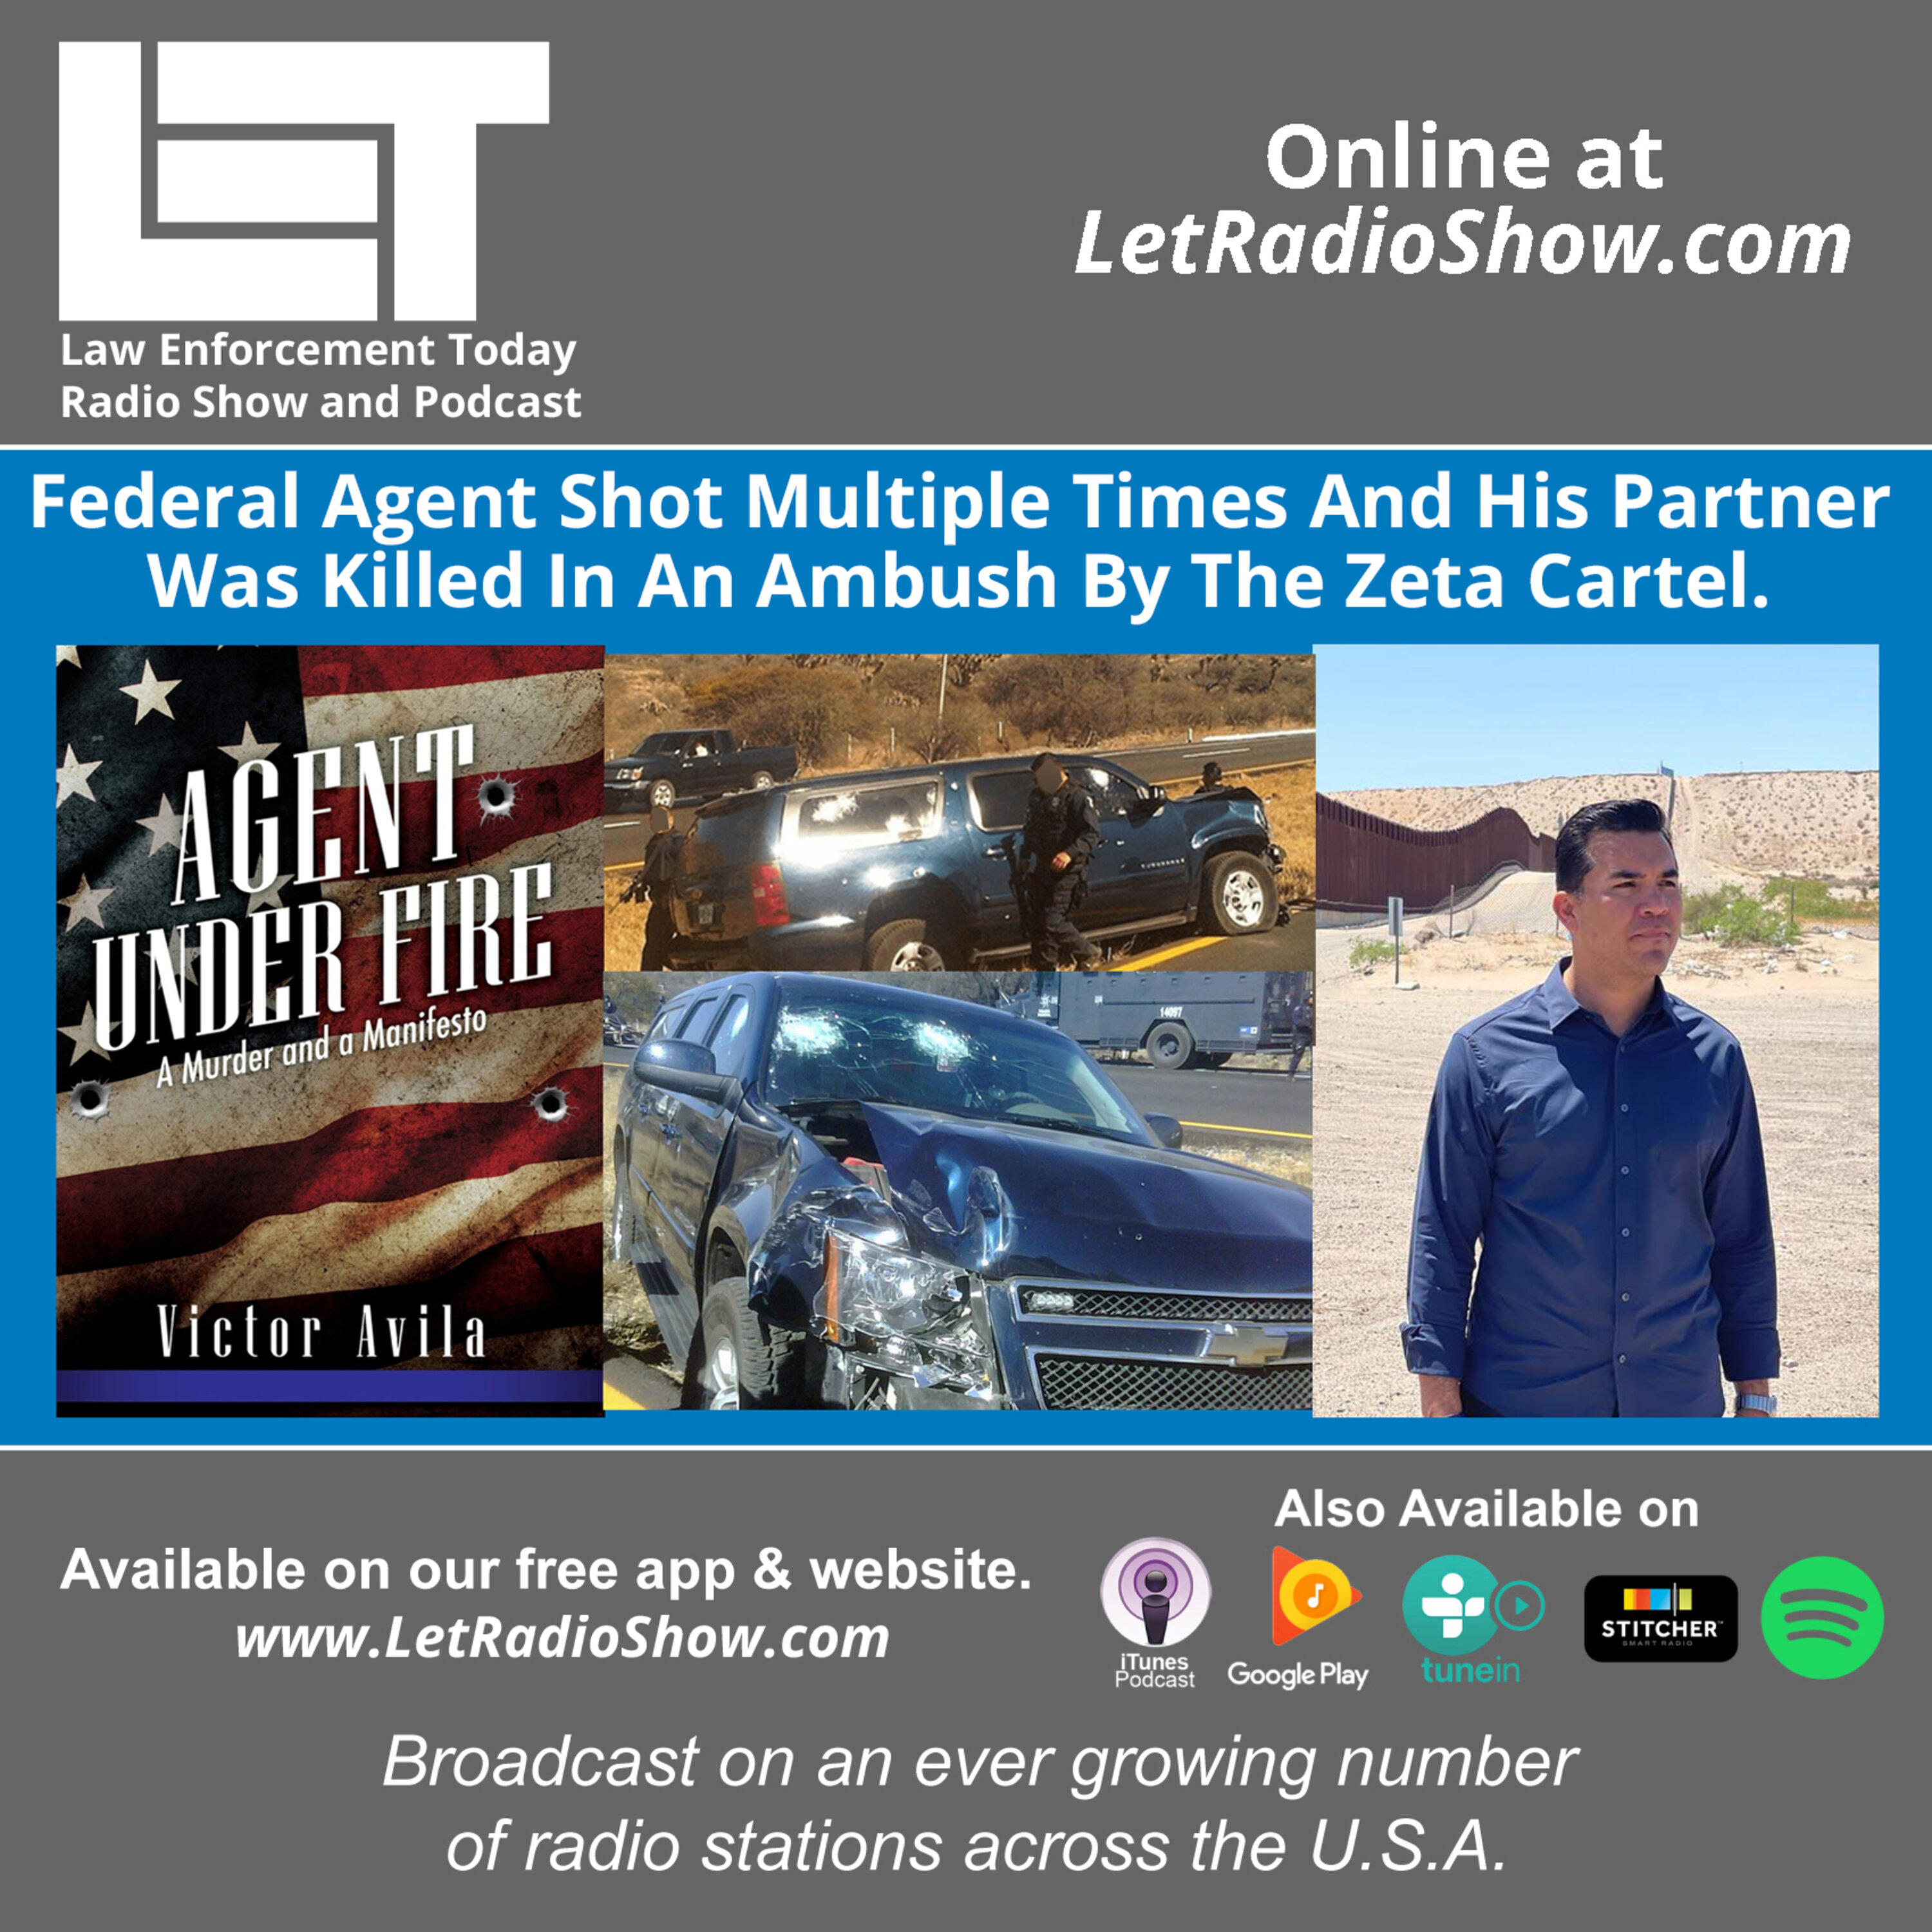 S5E46: Federal Agent Shot Multiple Times And His Partner Was Killed In An Ambush By The Zeta Cartel.